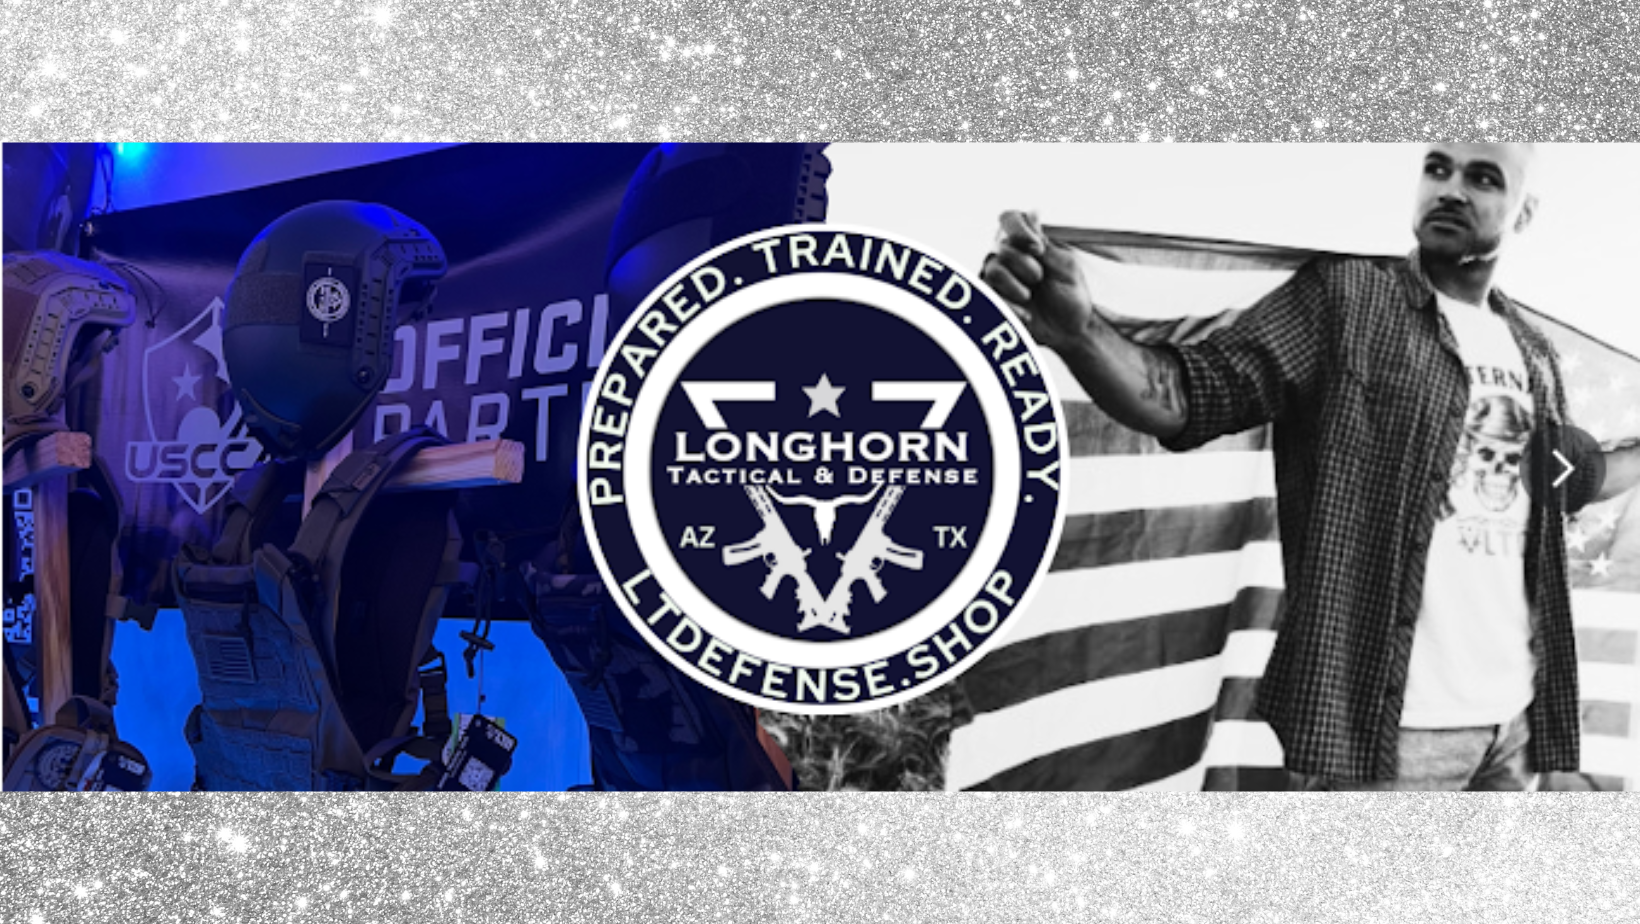 Longhorn Tactical and Defense